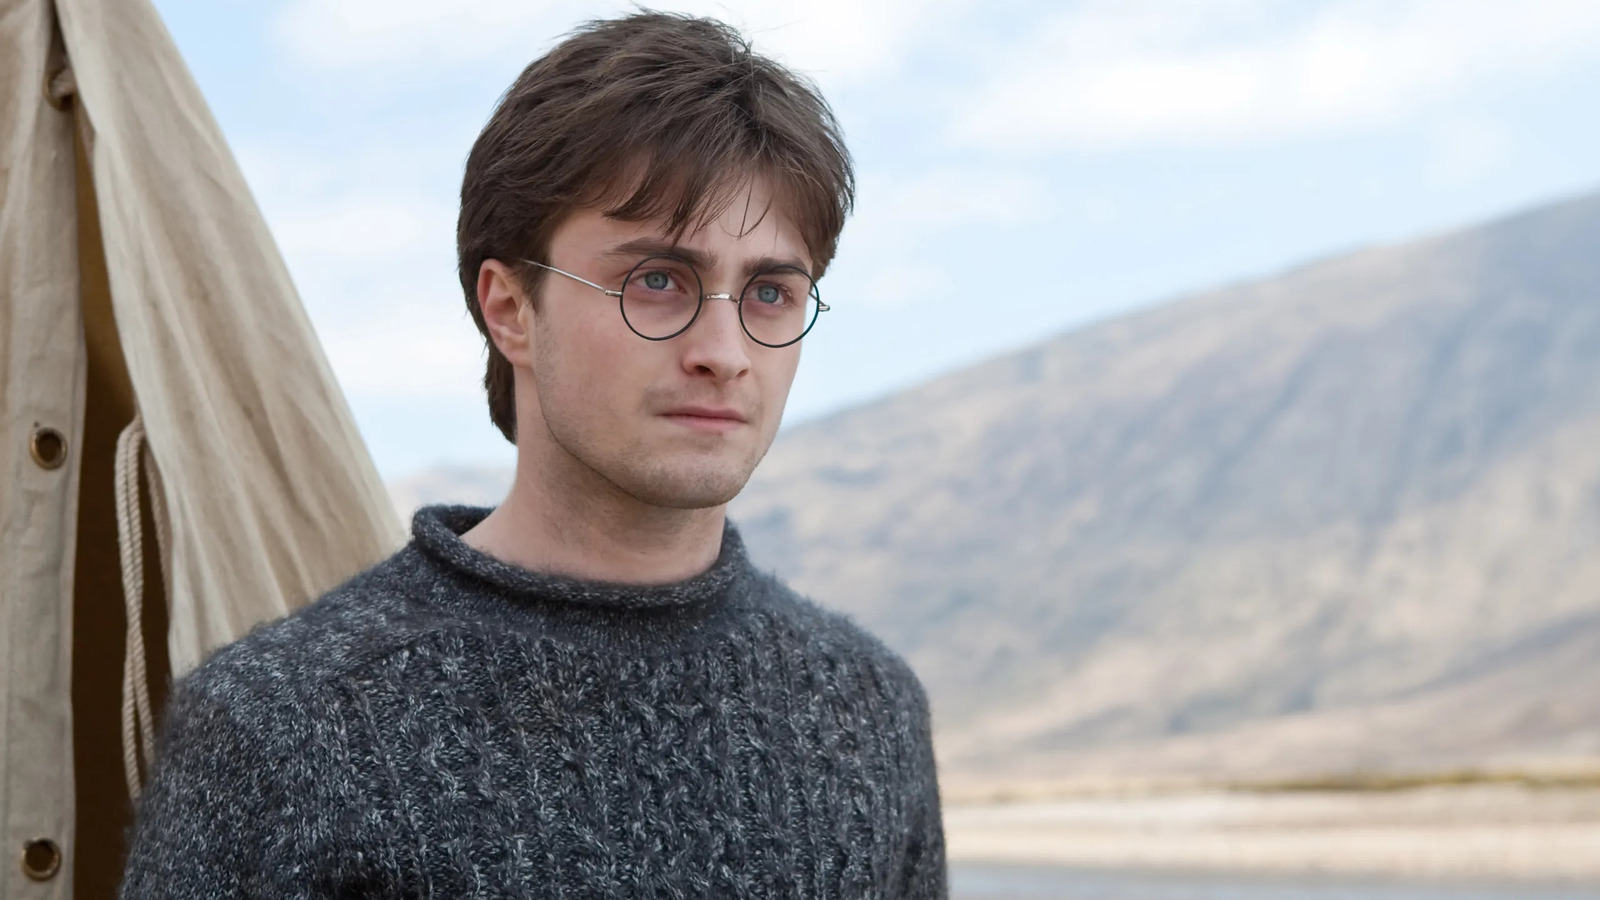 #5 Marvel Characters We’d Love To See Daniel Radcliffe Play